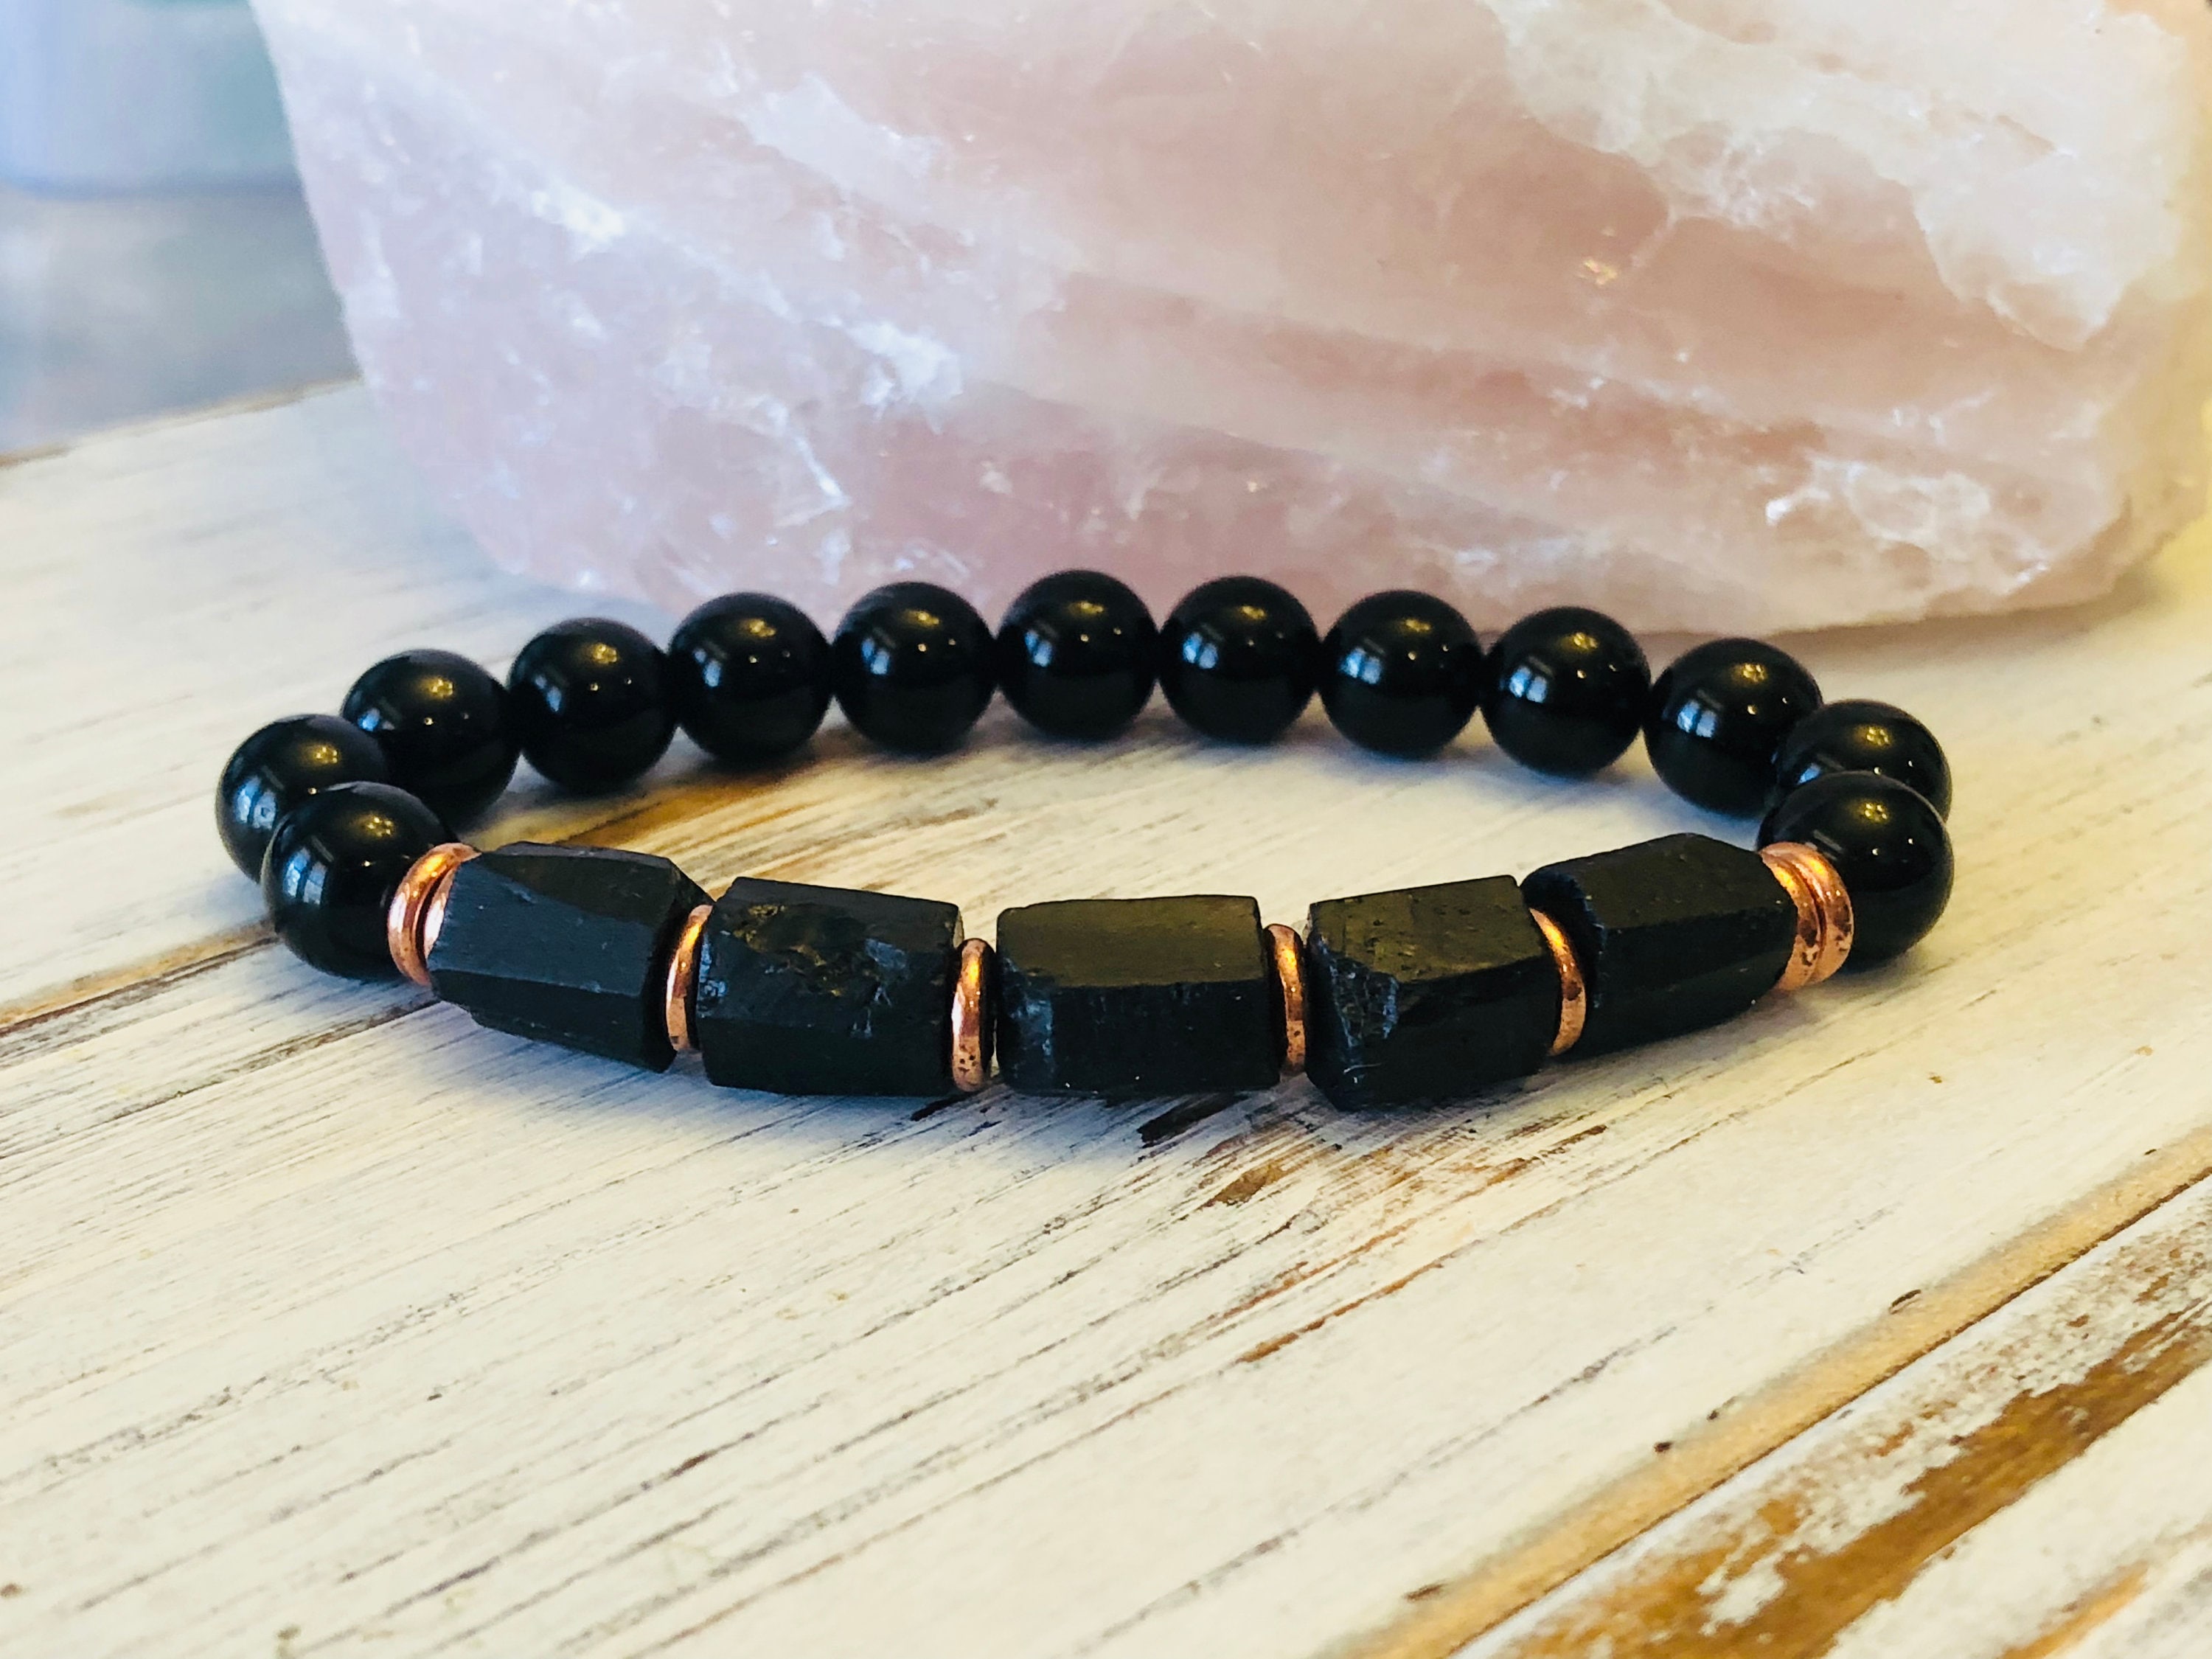 Buy Reiki Crystal Products Natural Black Tourmaline Bracelet 10 mm Beads  for Reiki Healing and Crystal Healing Stones Bracelet (Color : Black) at  Amazon.in